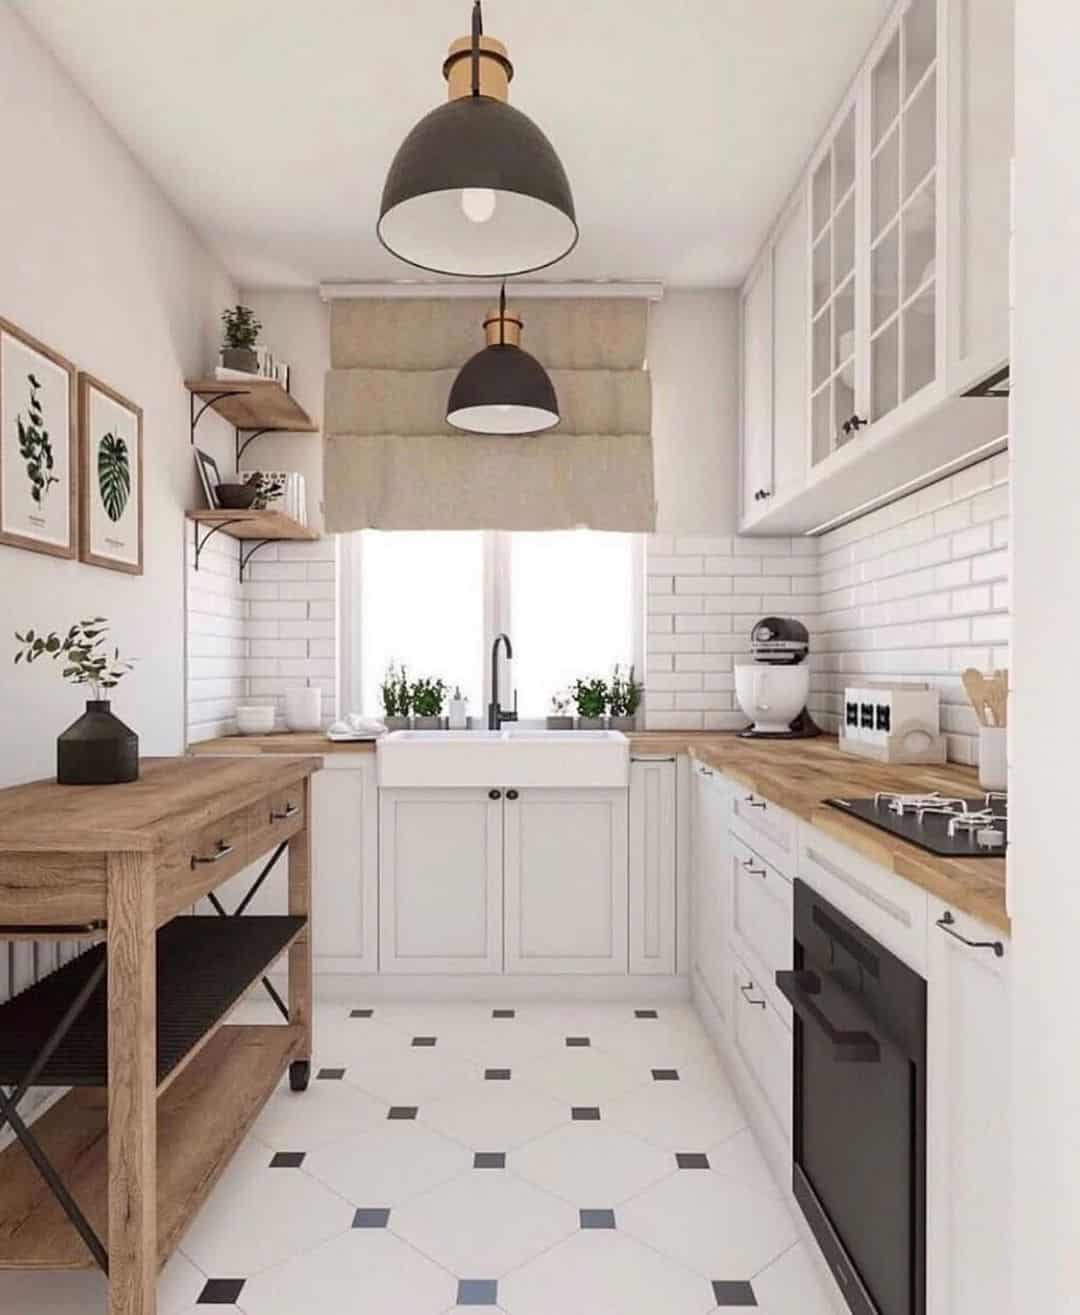 22 tile ideas for kitchen floors that will catch the eye